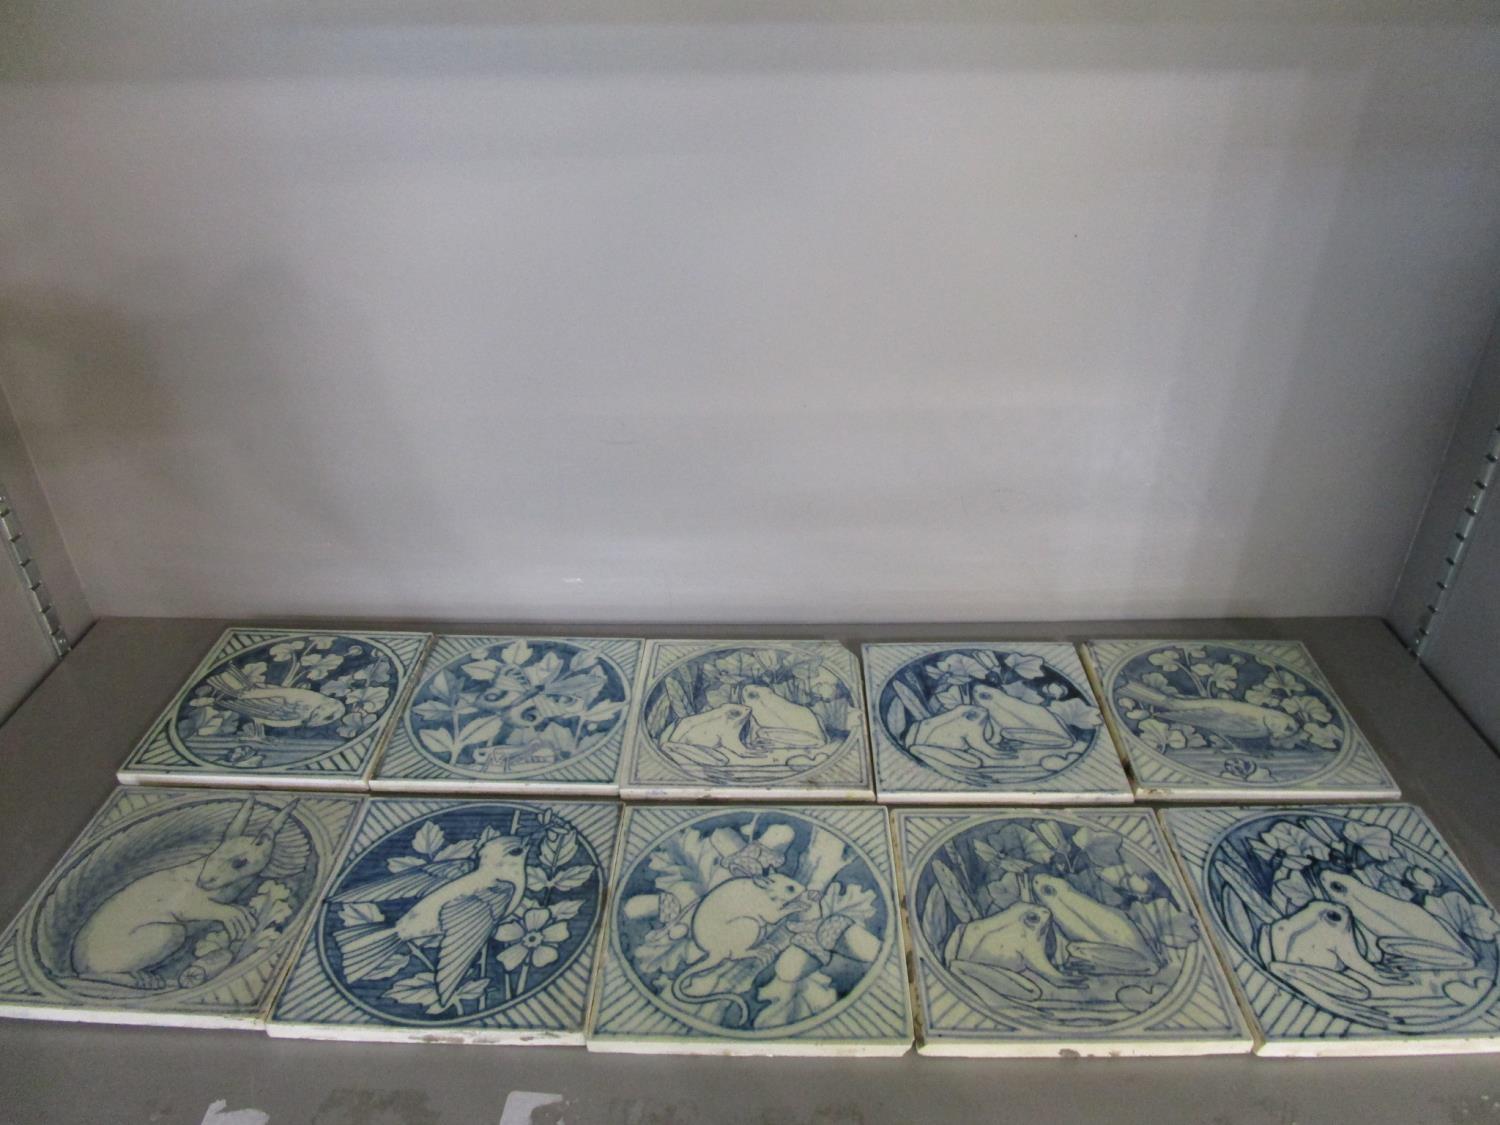 Minton's Kensington Gore Art Pottery Studio - a group of ten aesthetic style Victorian blue and